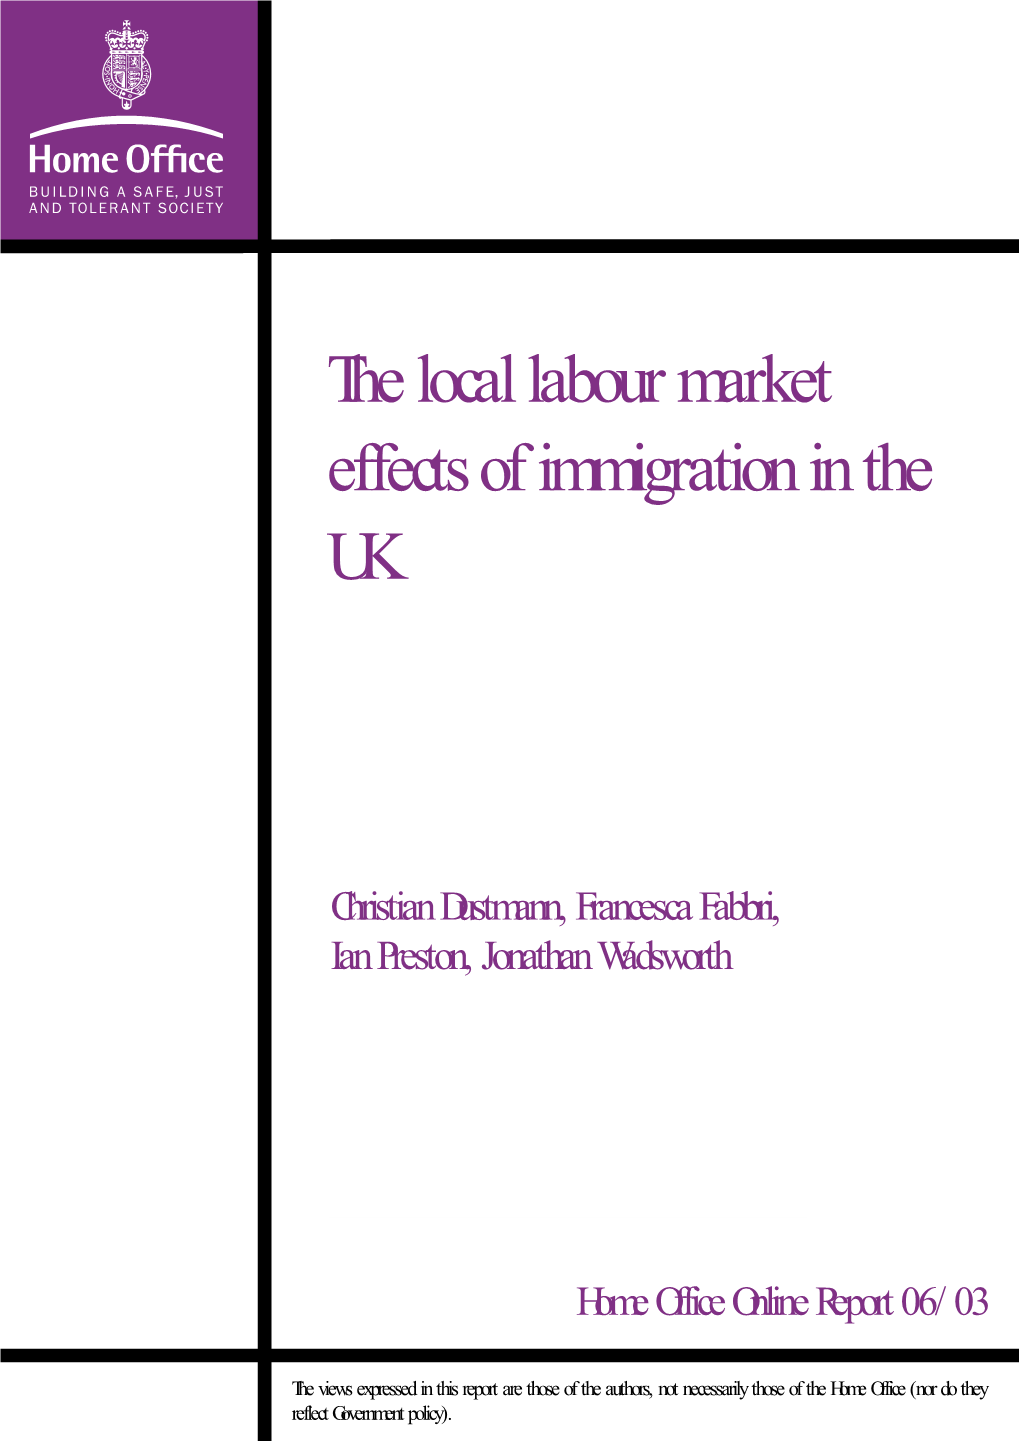 The Local Labour Market Effects of Immigration in the UK